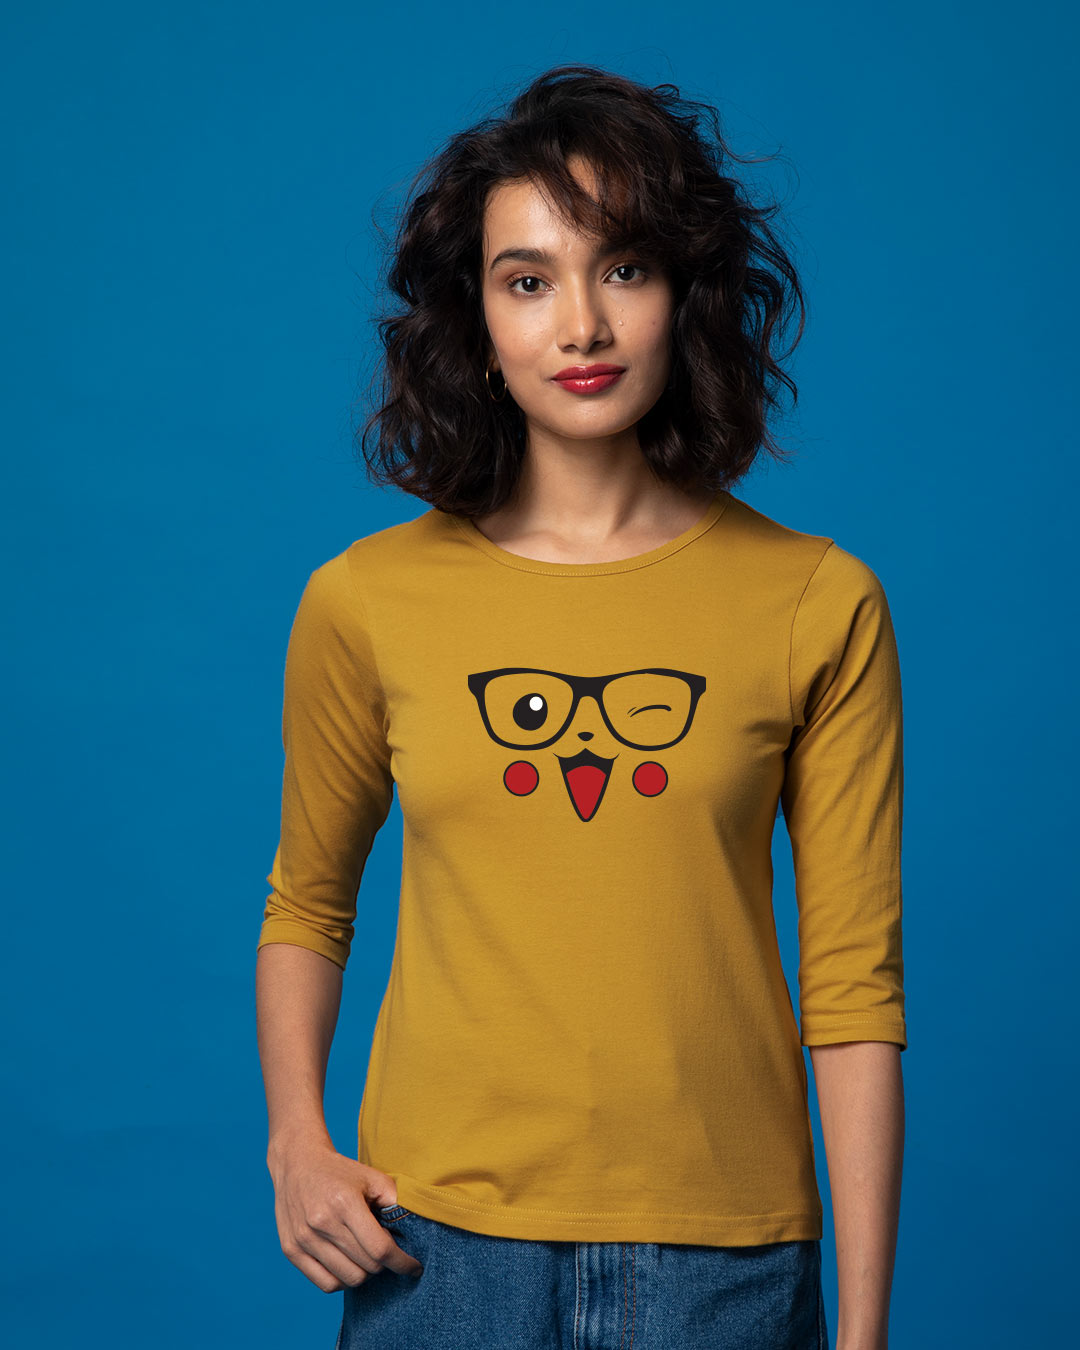 Buy Pika-geek Round Neck 3/4th Sleeve T-Shirt for Women yellow Online ...